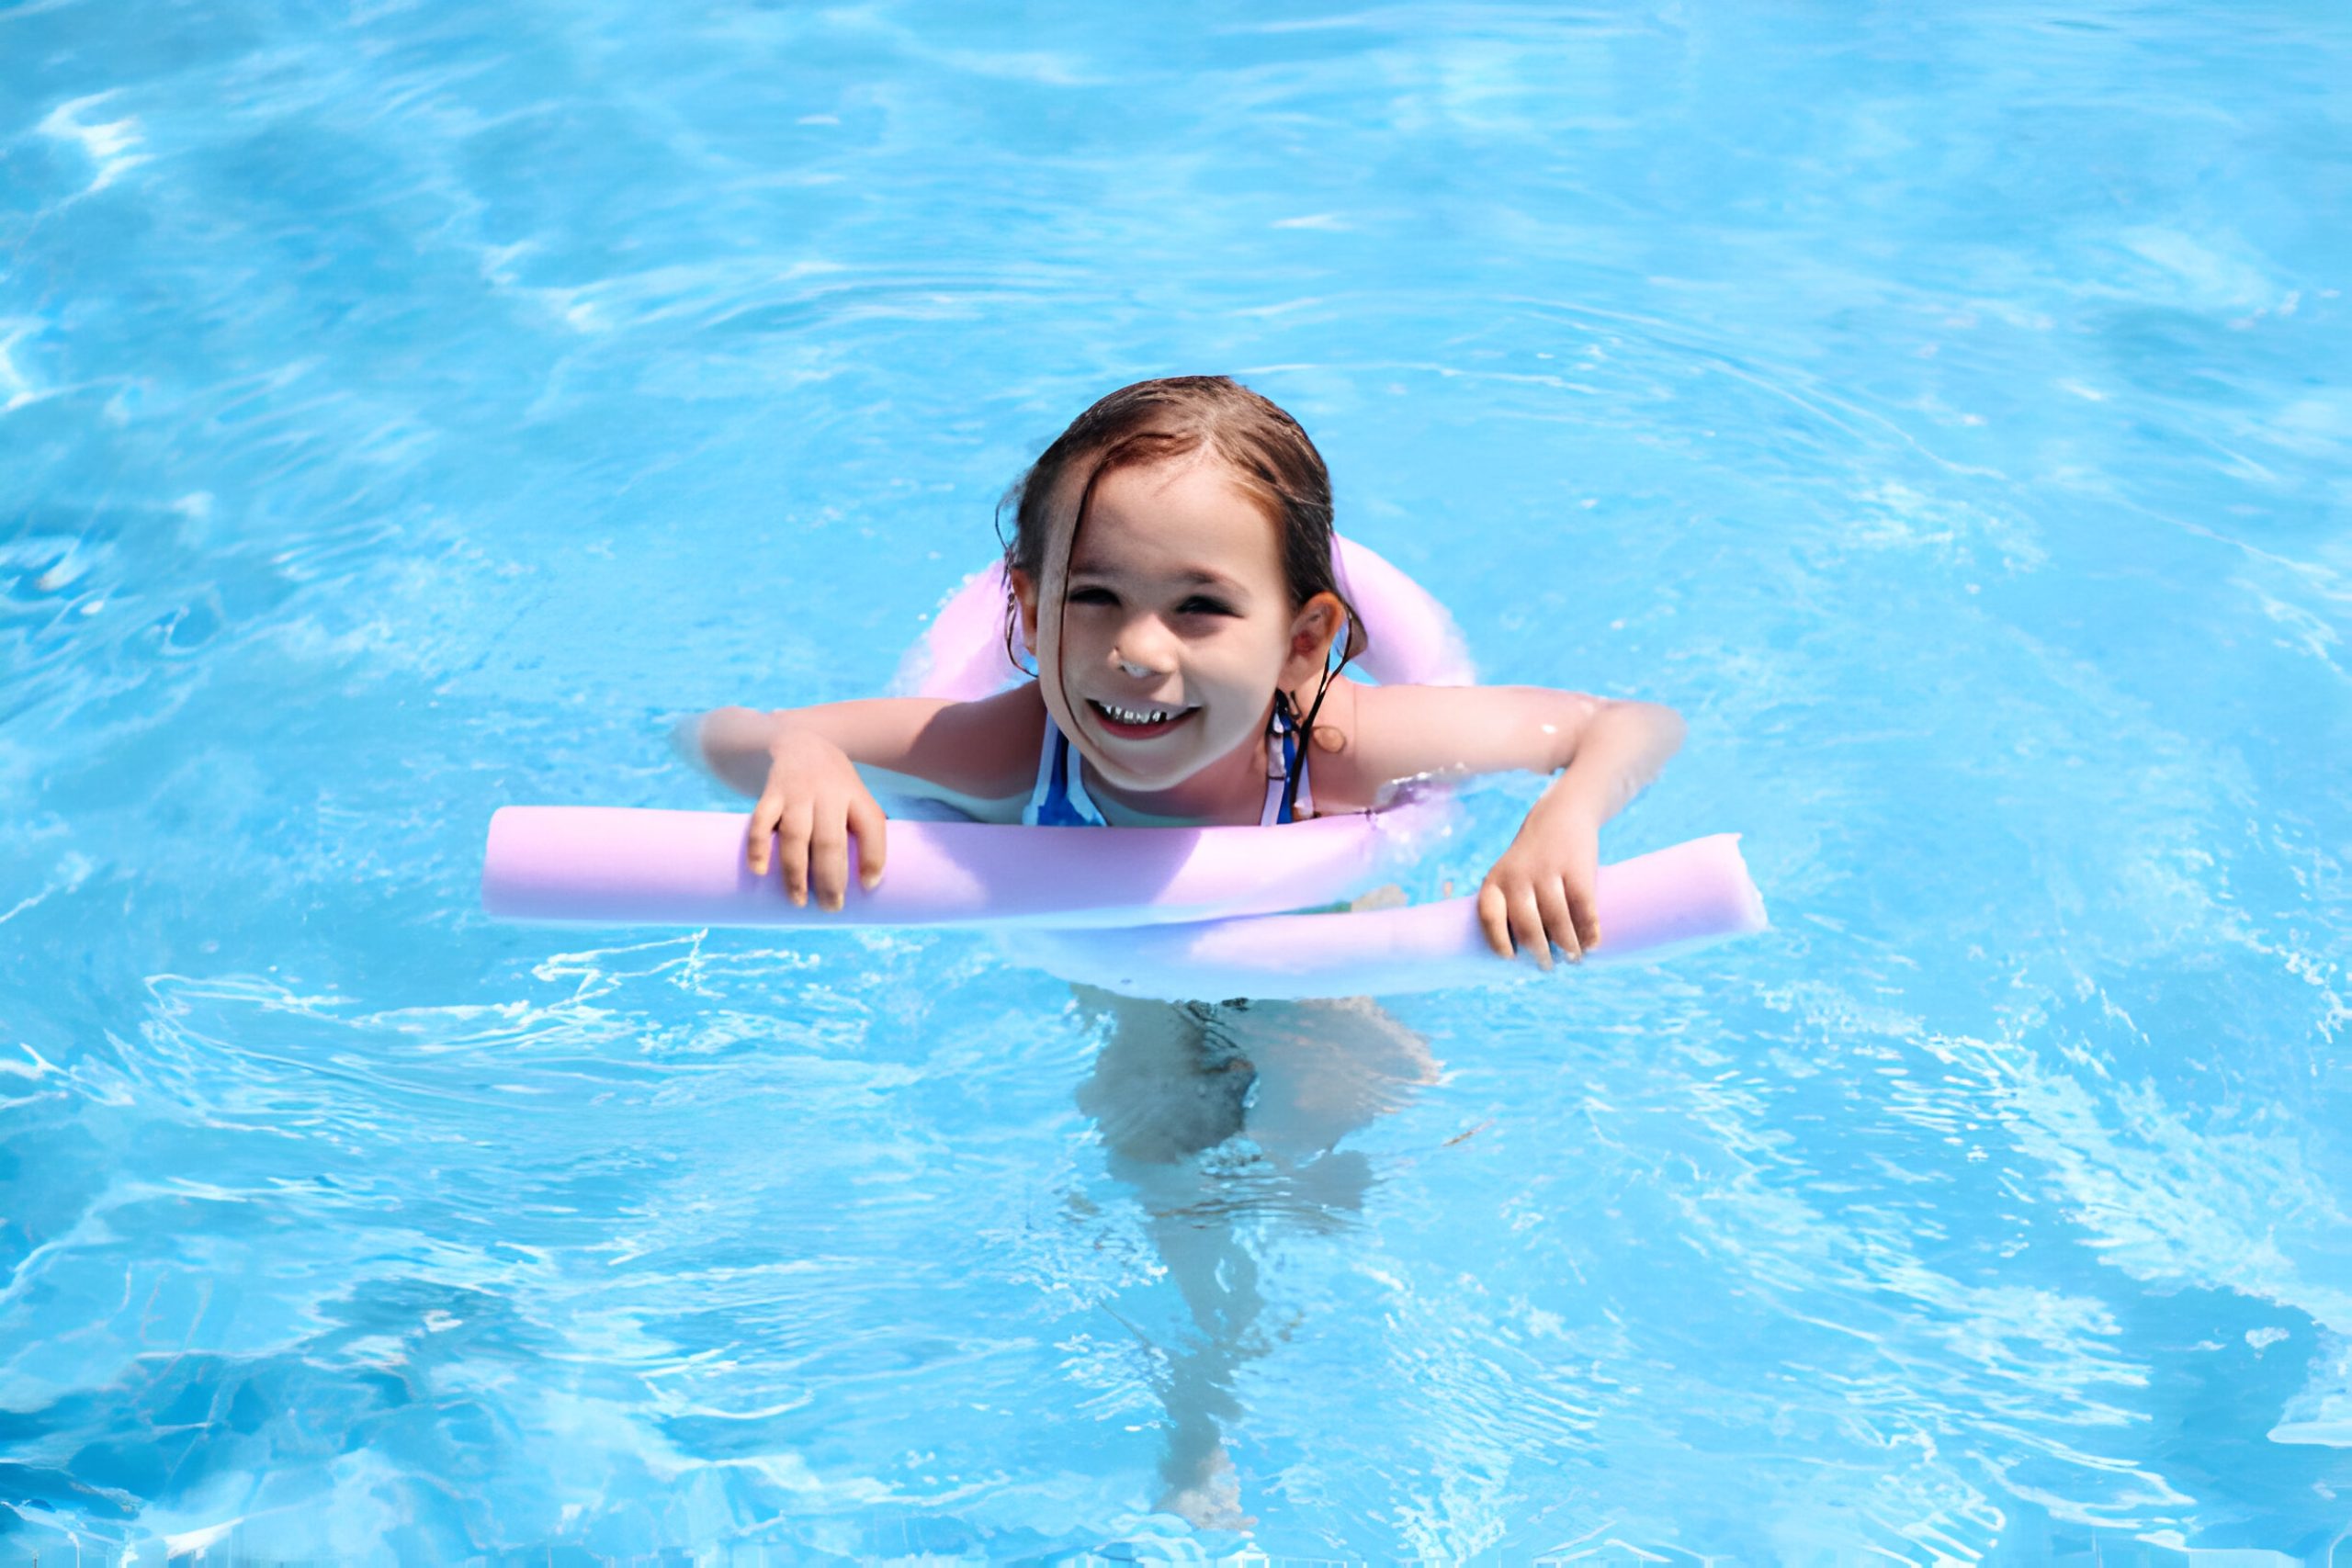 Top 10 Summer Safety Tips for Kids